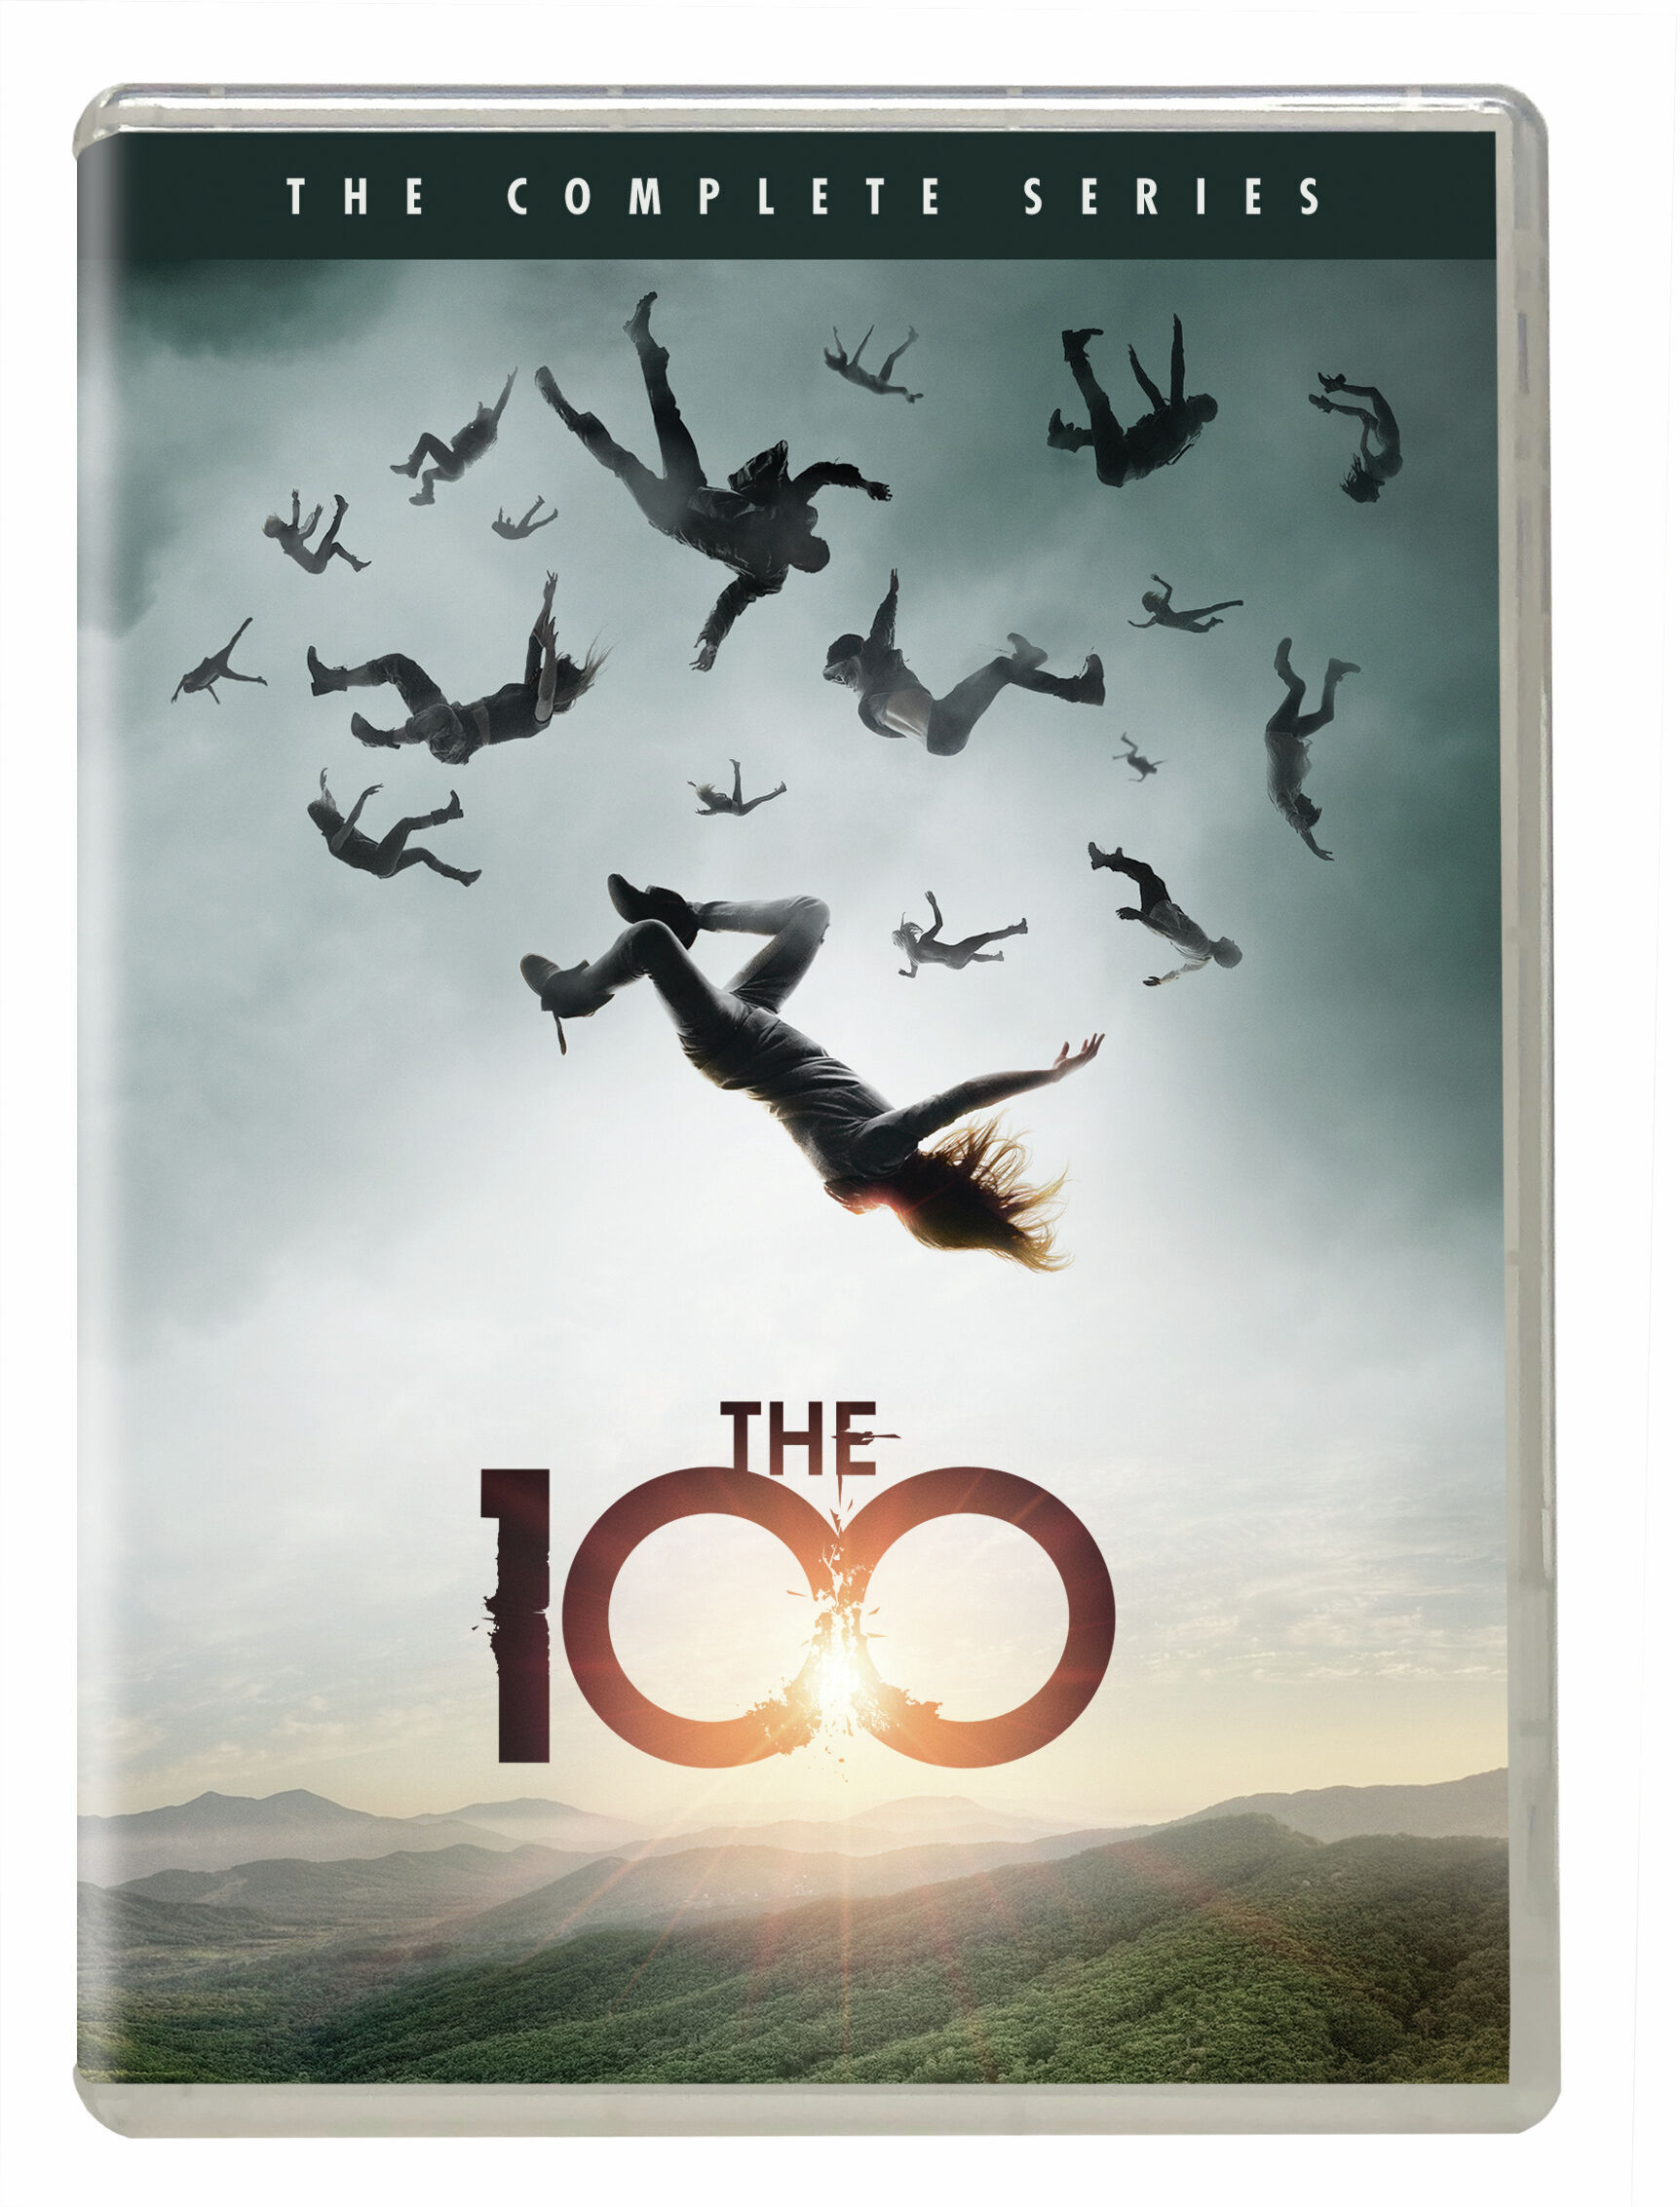 The 100: The Complete Series (Box Set) - DVD [ 2020 ]  - Sci Fi Television On DVD - TV Shows On GRUV